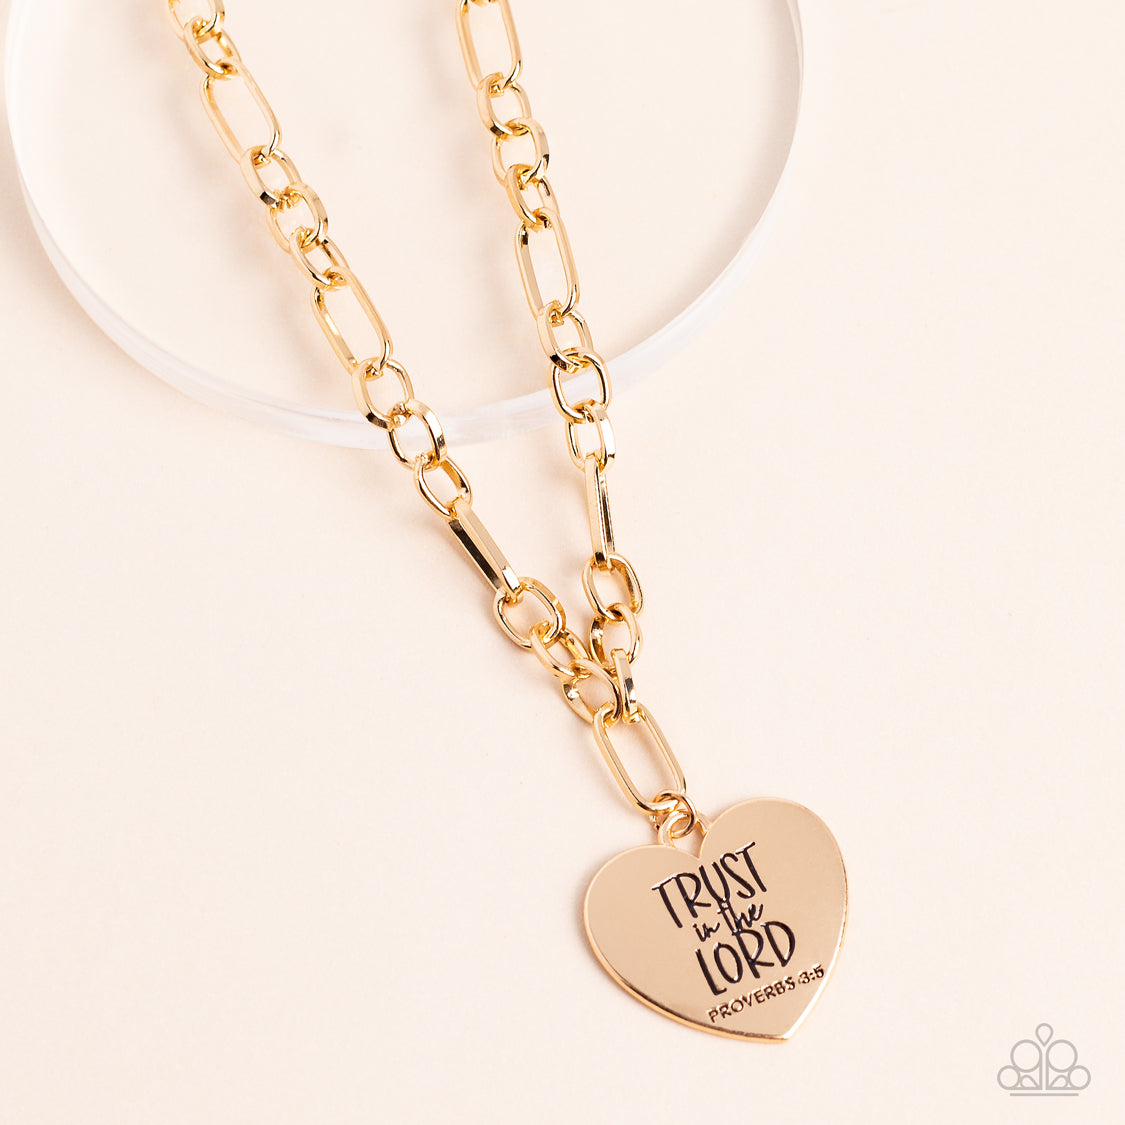 Perennial Proverbs Gold Necklace - Paparazzi Accessories  Dangling from a gold figaro chain, a charming heart pendant swings. Stamped upon the shiny surface, the phrase "Trust in the Lord" with the bible reference listed below it "Proverbs 3:5" are listed in different fonts for an optimistic and hopeful finish. Features an adjustable clasp closure.  Sold as one individual necklace. Includes one pair of matching earrings.